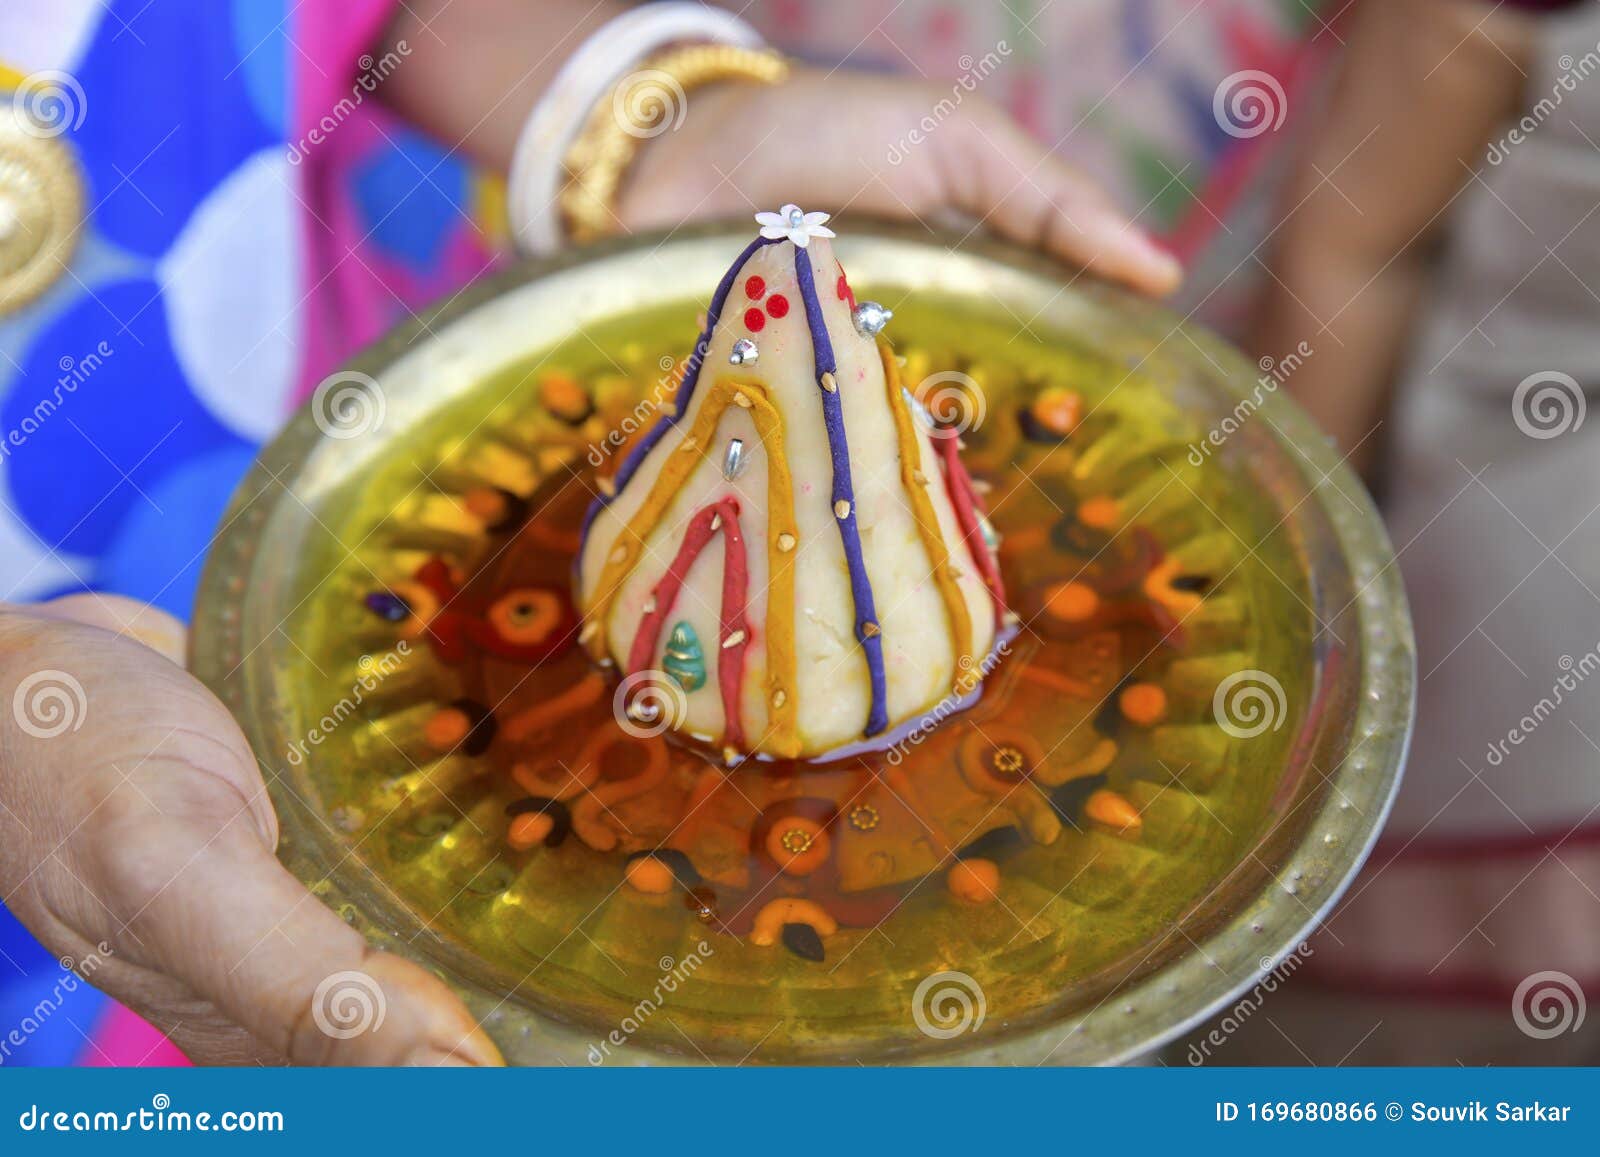 Bengali Marriage Rituals With Beautiful Decoration Of Chiri On A Brass Plate With Musterd Oil For Bride And Groom In India Stock Photo Image Of Main Friends 169680866